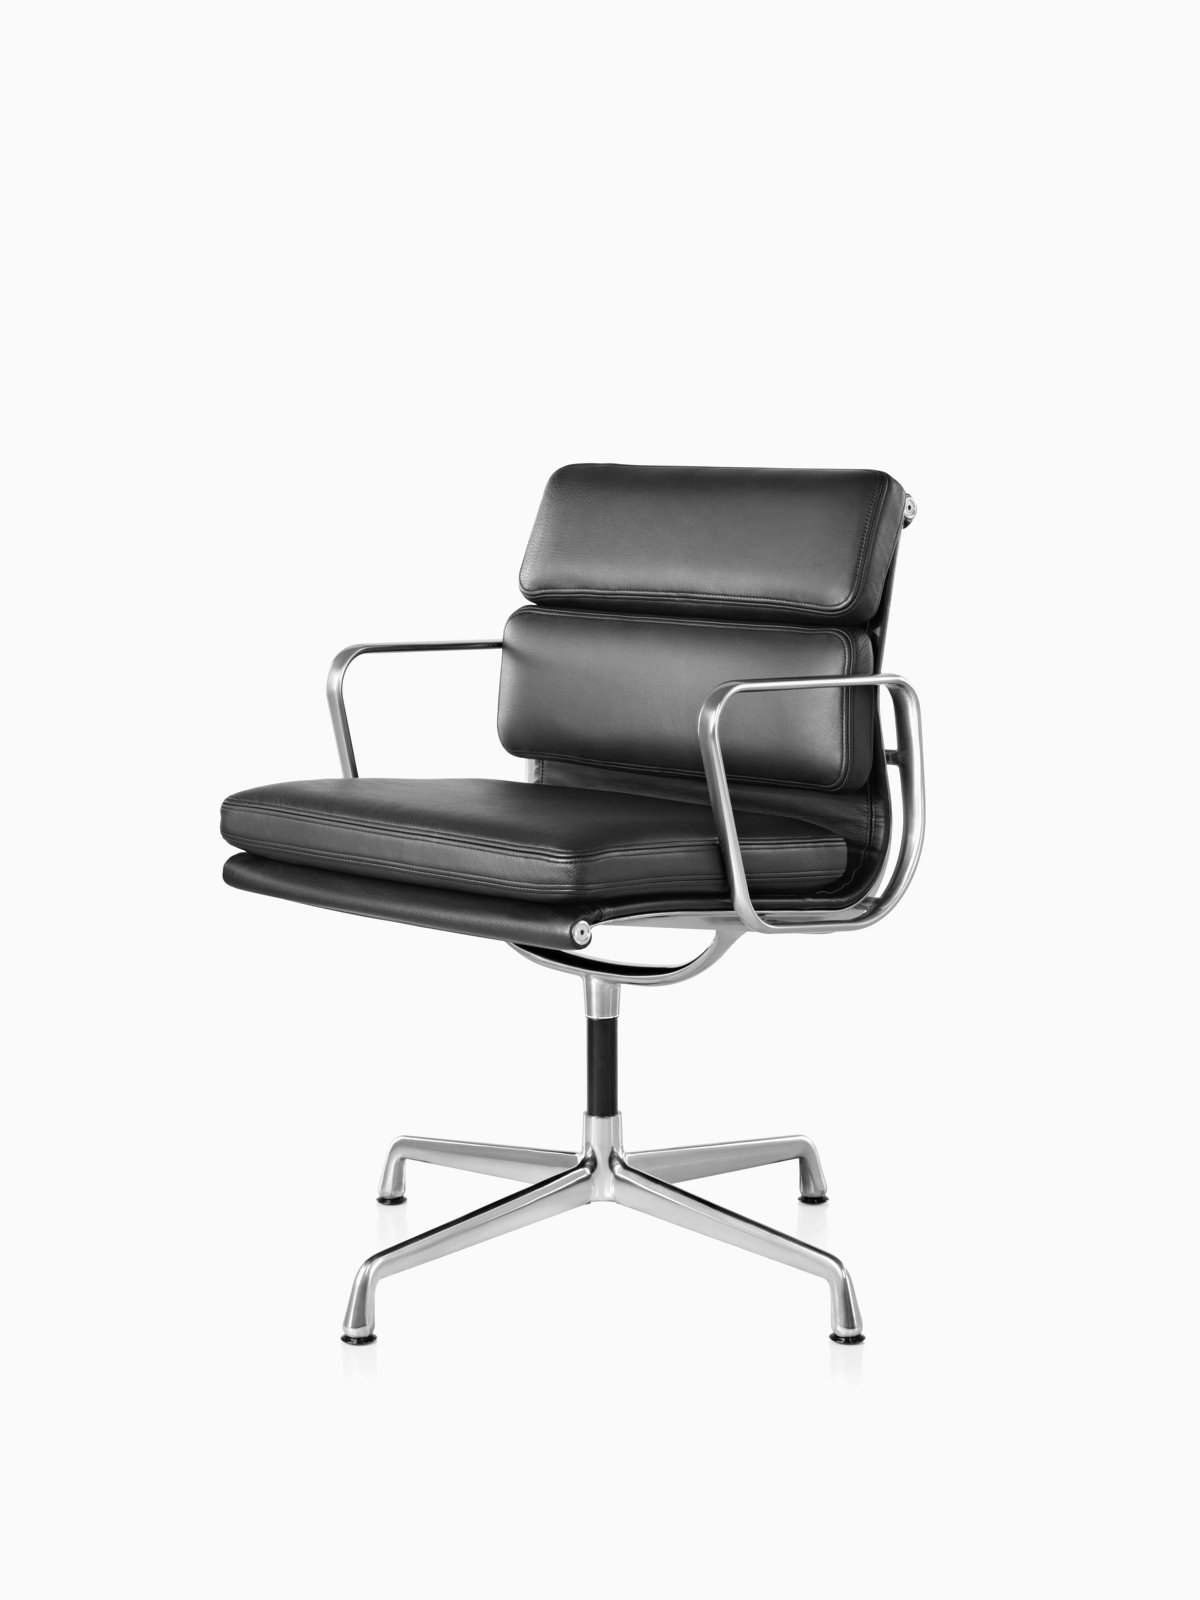 Eames Soft Pad Chairs